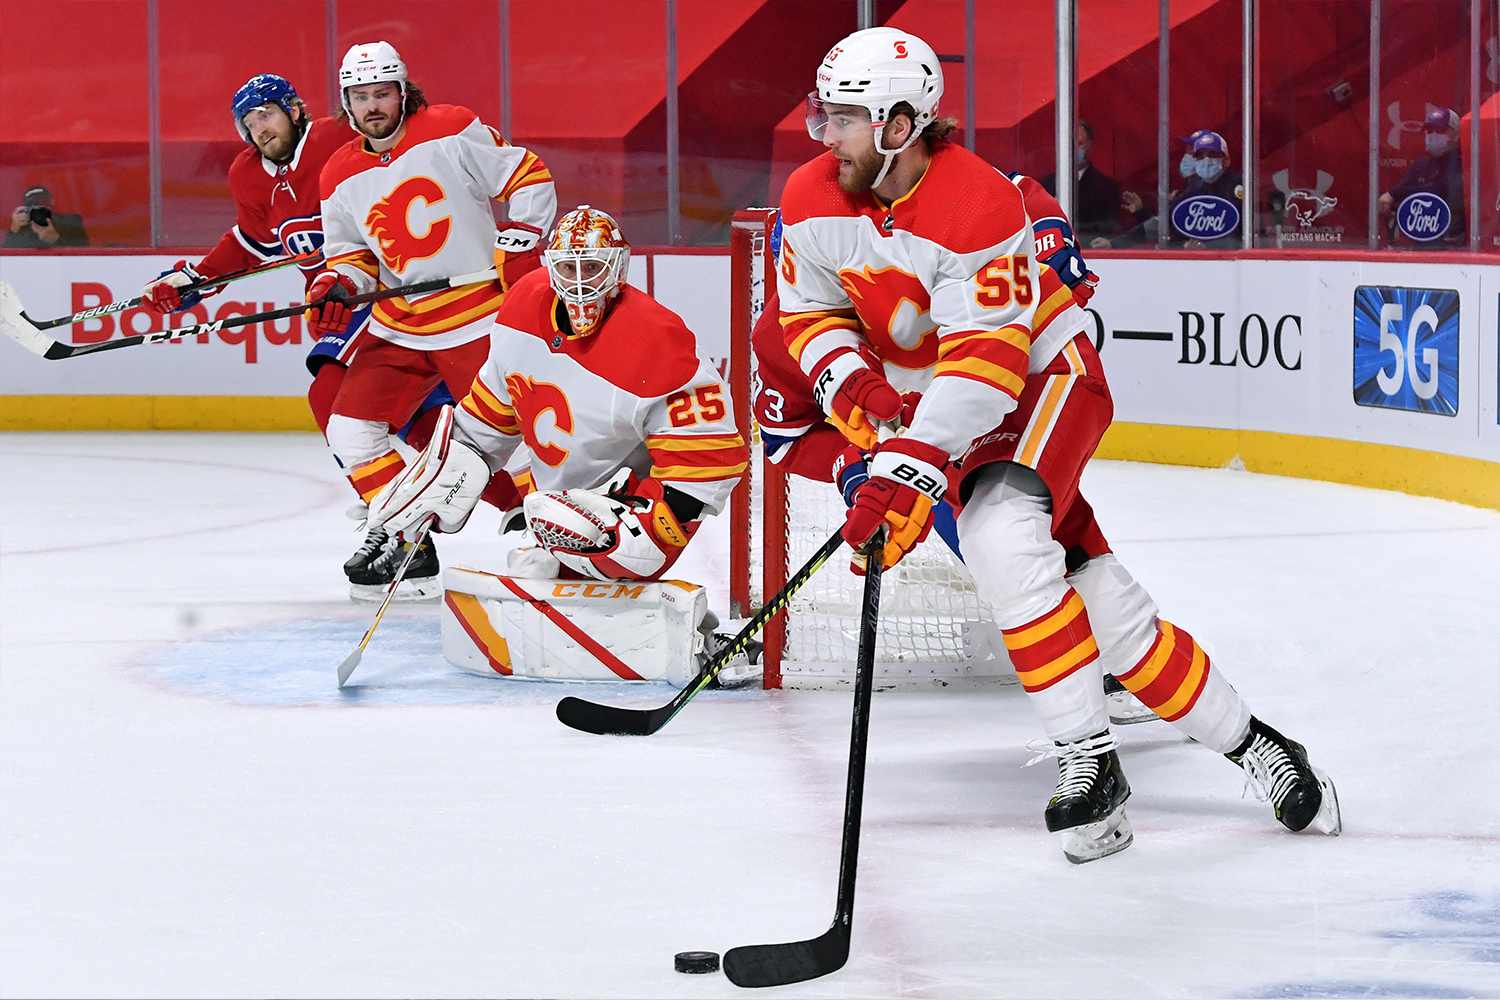 Noah Hanifin #55 of the Calgary Flames looks to pass the puck against against the Montreal Canadiens in the NHL game at the Bell Centre on April 16, 2021